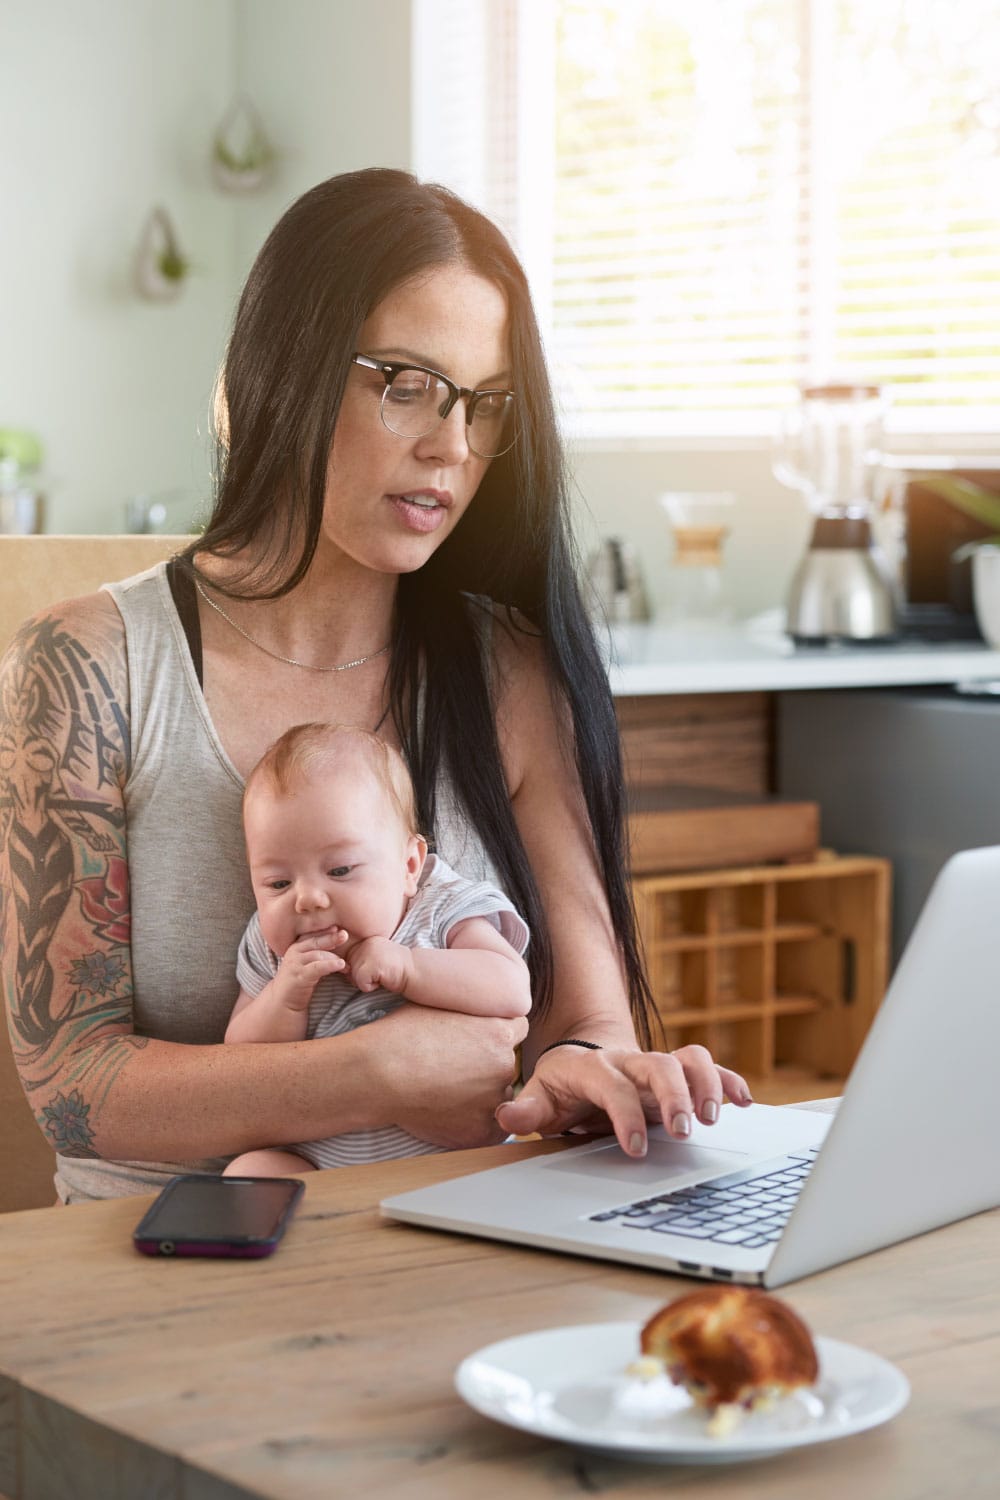 Mother Working From Home With Baby. Work from home mum holding baby while working on laptop computer, busy multitasking during maternity period